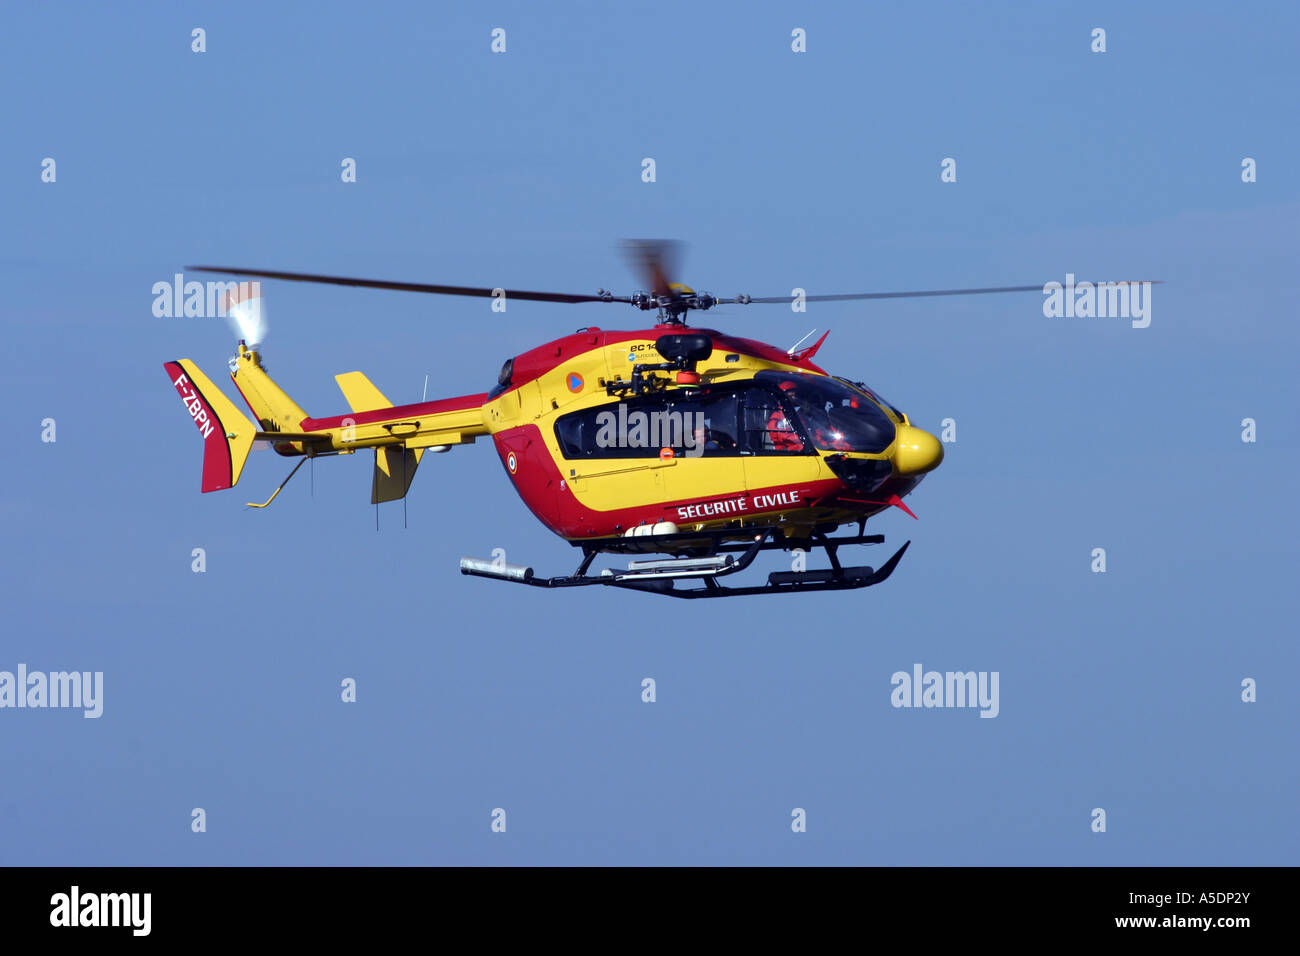 A Securite Civile Air Sea rescue helicopter, Brittany, France, Europe Stock Photo